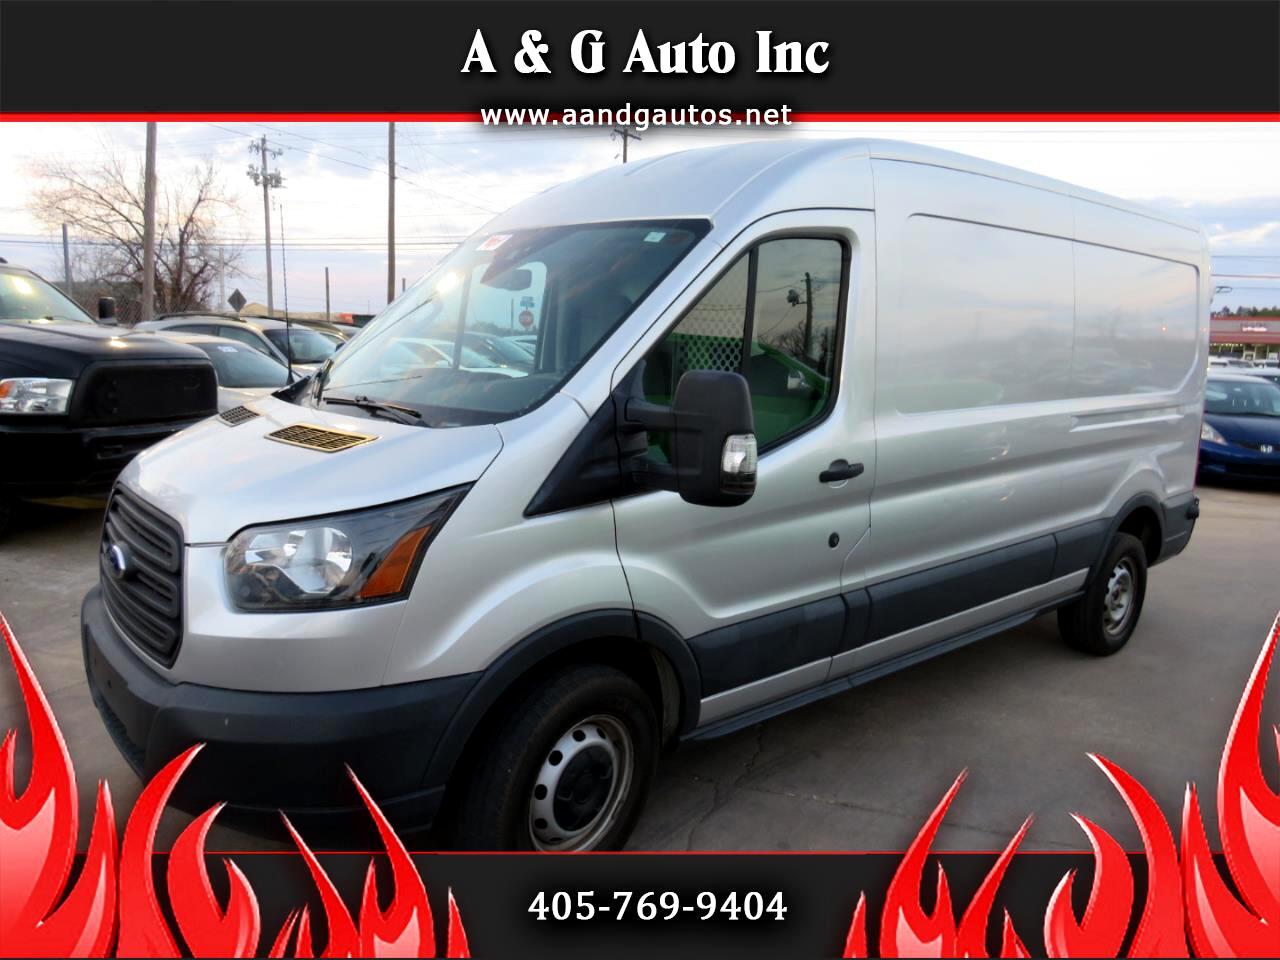 2016 Ford Transit for sale in Oklahoma City OK 73141 by A & G Auto Inc